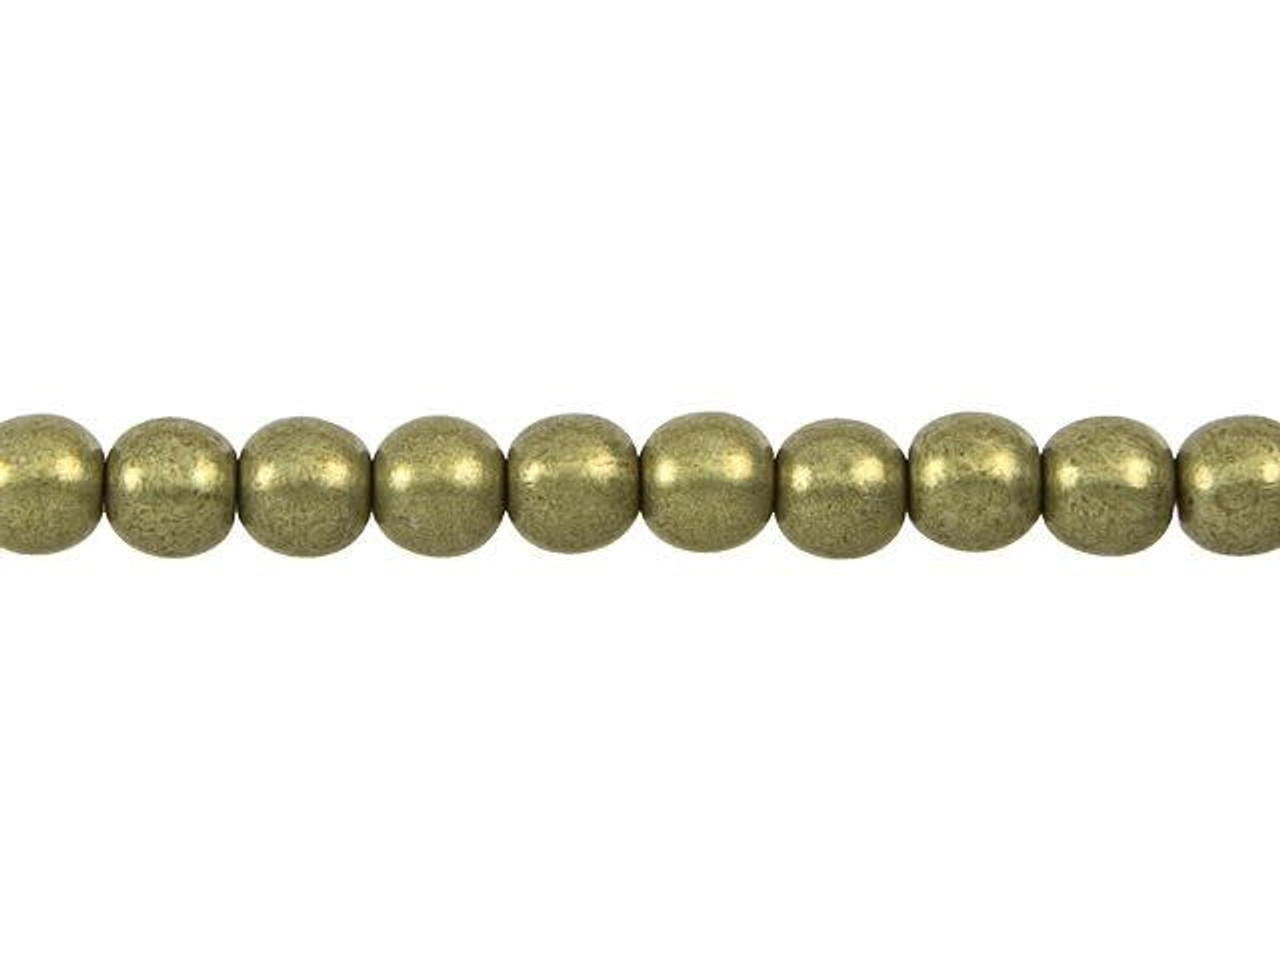 6mm Stainless Steel Round Seamless Beads-50Pc-Jewelry making Supplies